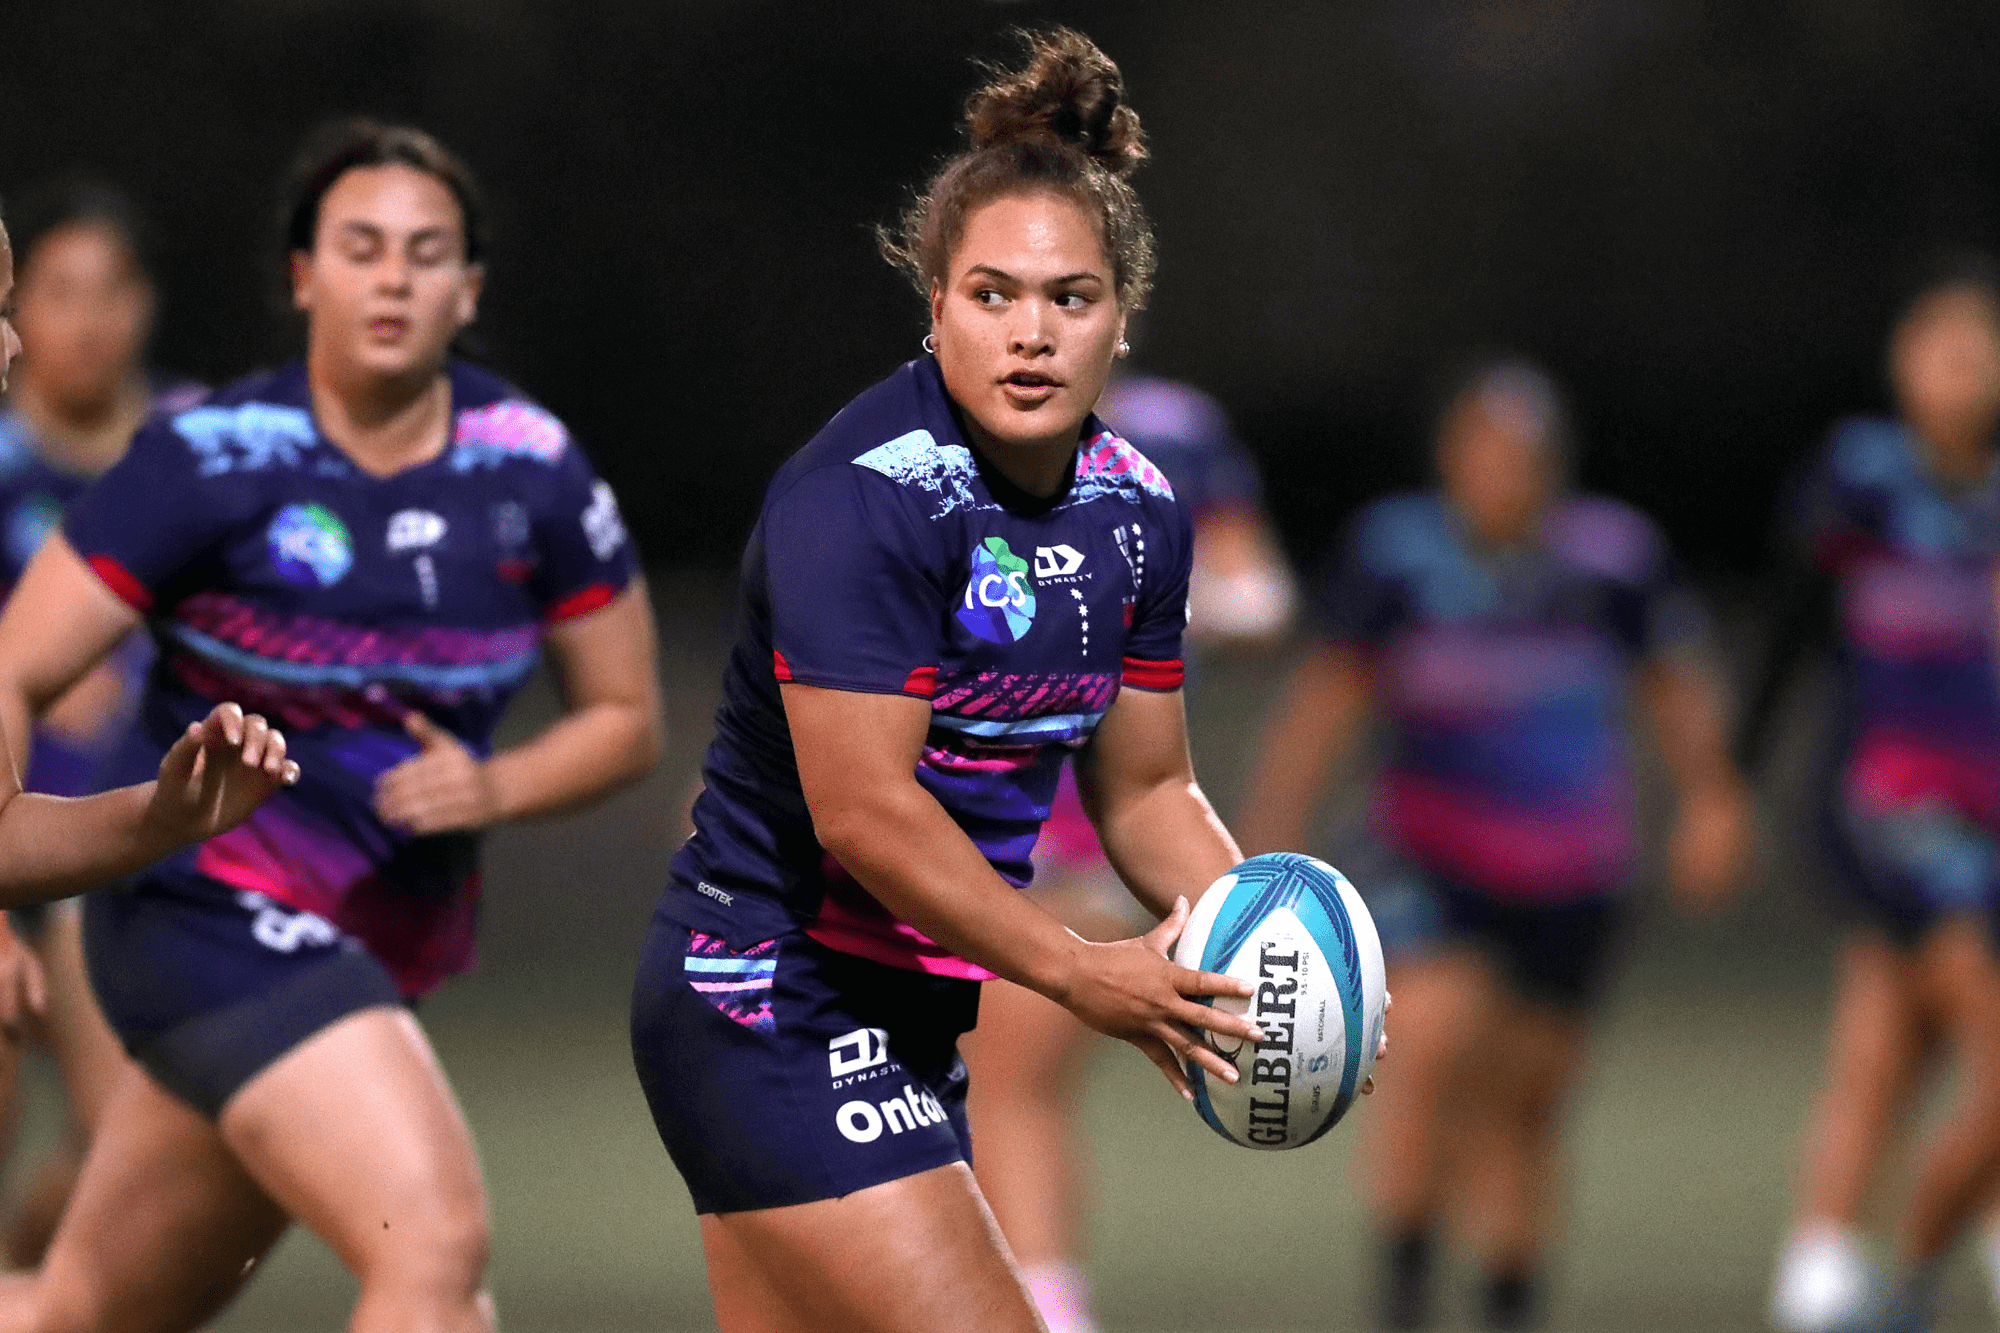 Ashley Marsters (c) of the Rebels runs with the ball during a Melbourne Rebels Women Super W training session at Box Hill Rugby Club, on March 23, 2023, in Melbourne, Australia. (Photo by Kelly Defina/Getty Images)